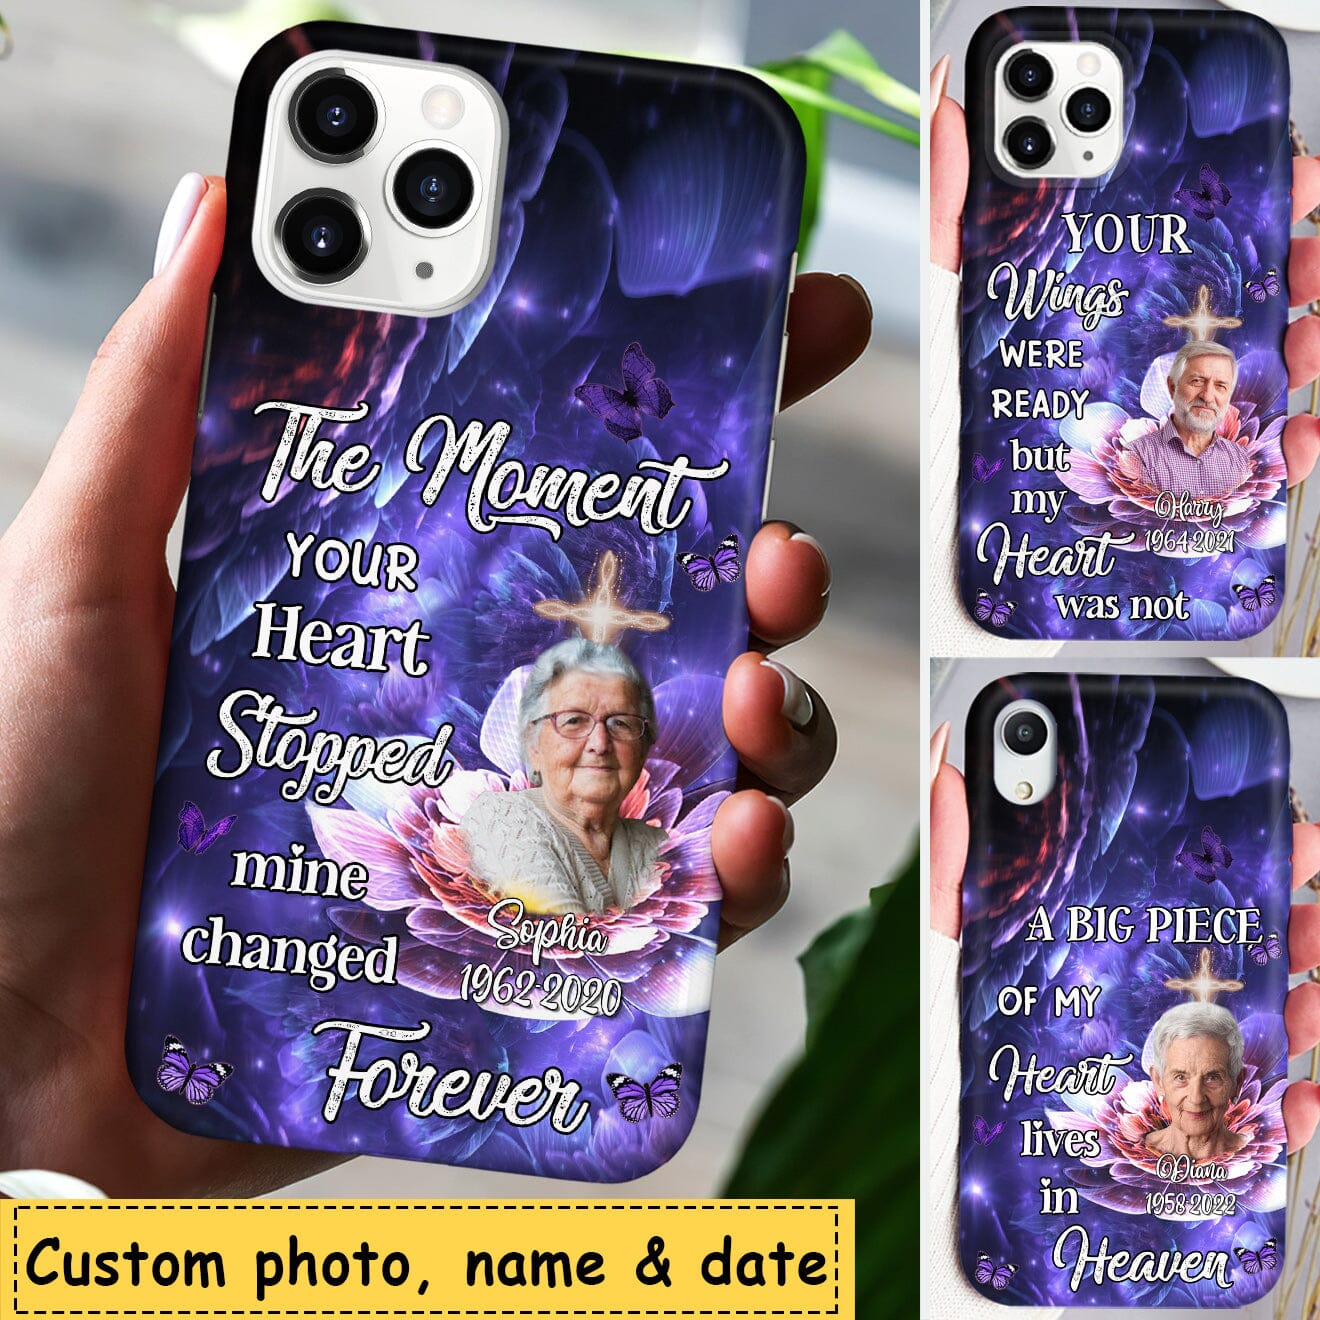 The moment your heart stopped mine changed forever Unique Memorial Flower Personalized Phone case